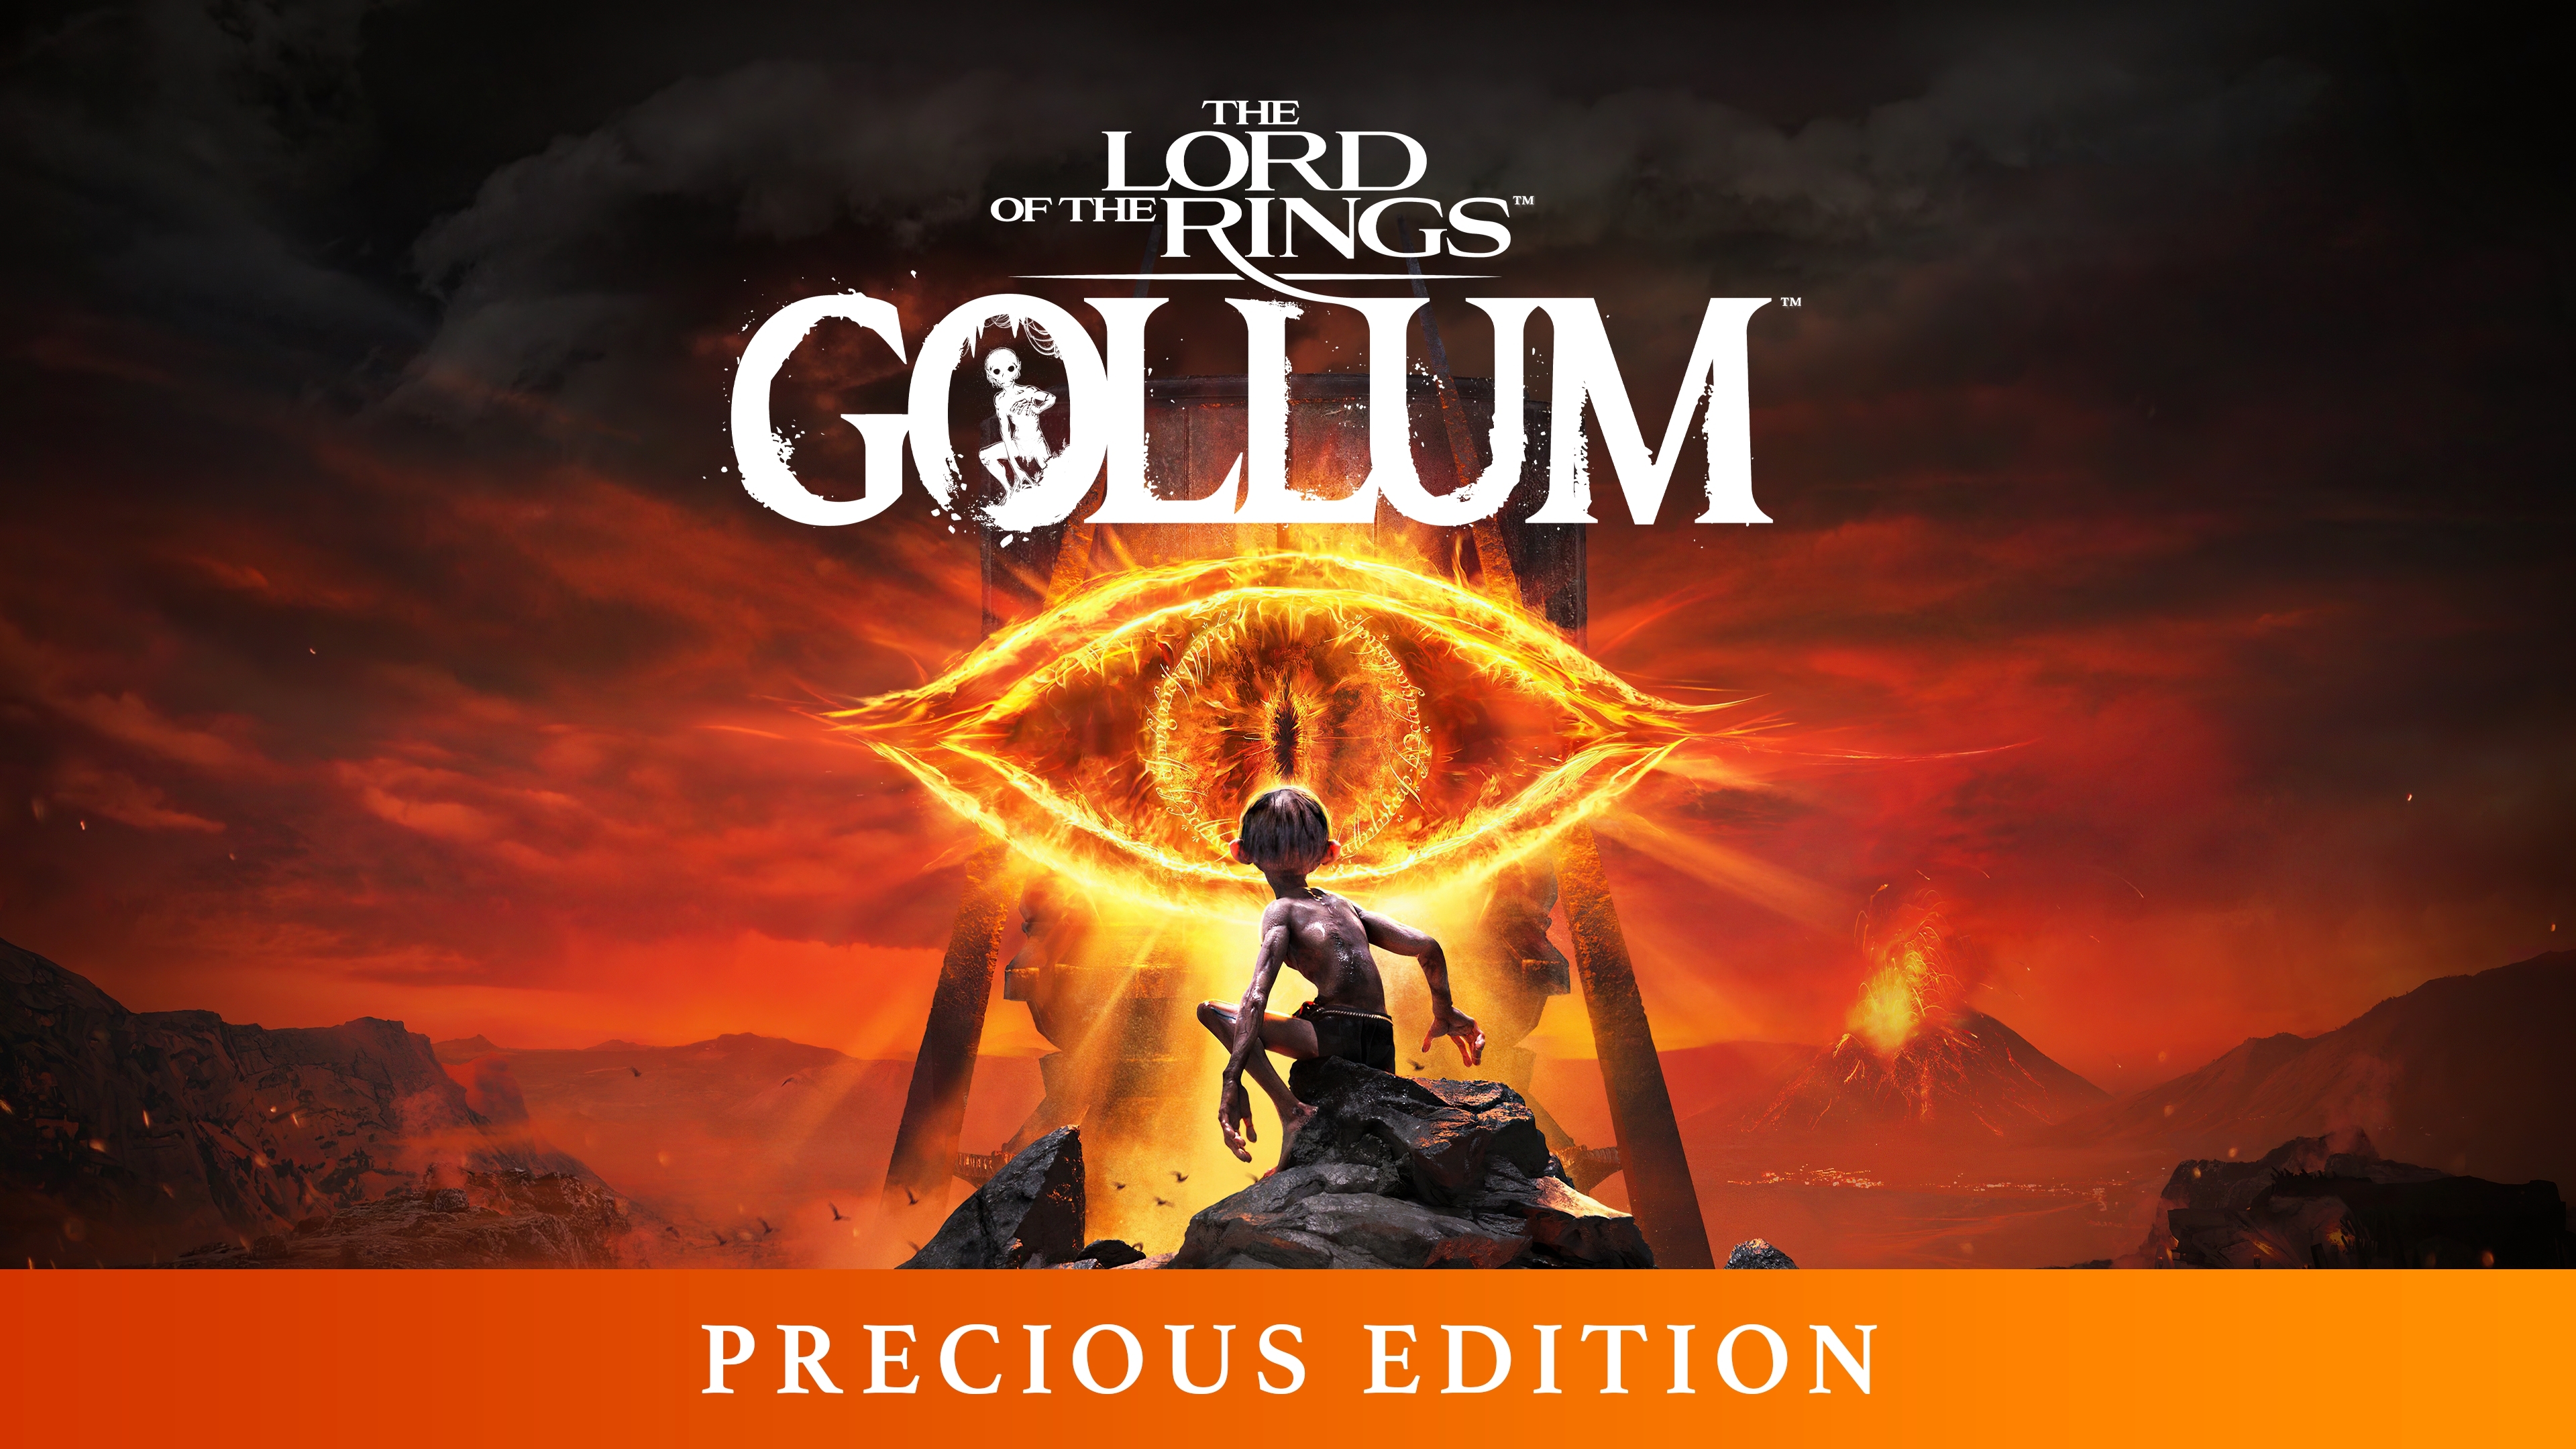 The Lord of the Rings: Gollum – Precious Edition (v0.2.51064 + All DLCs +  Bonus Content + MULTi13) (From 25.3 GB) – [DODI Repack] : r/CrackWatch